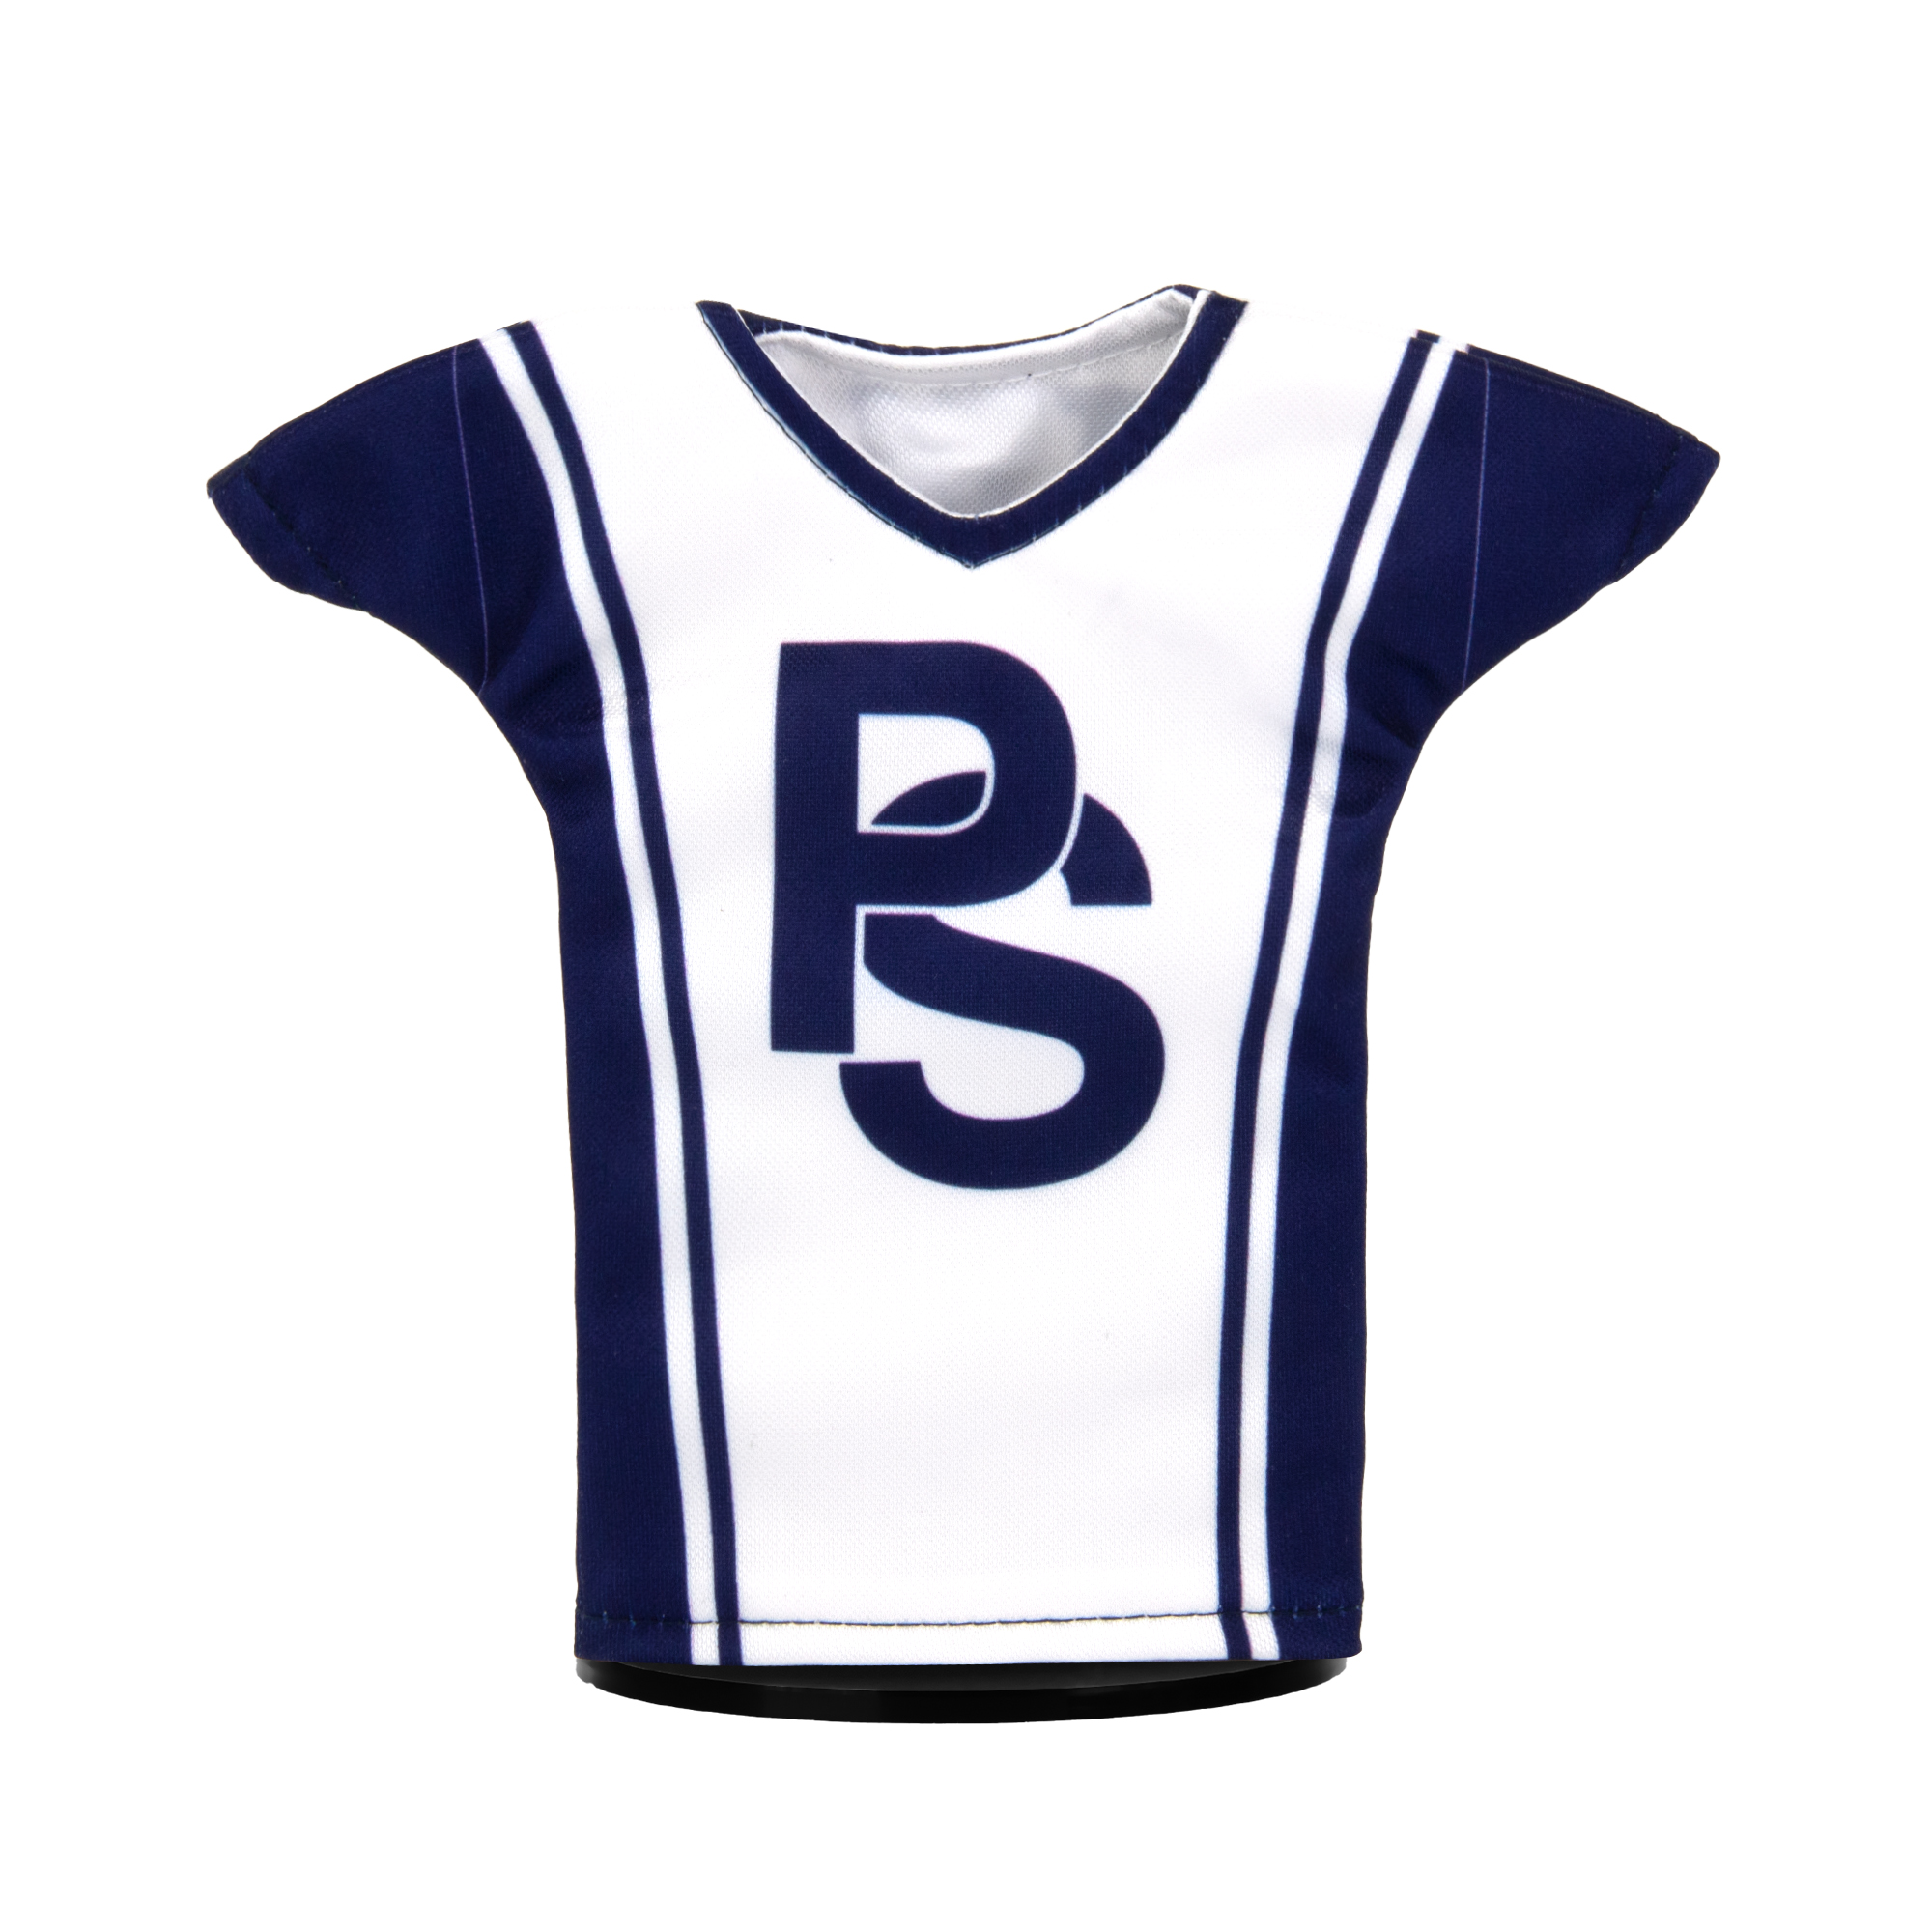 Penn State Nittany Lions Marching Band Mini Jersey Front